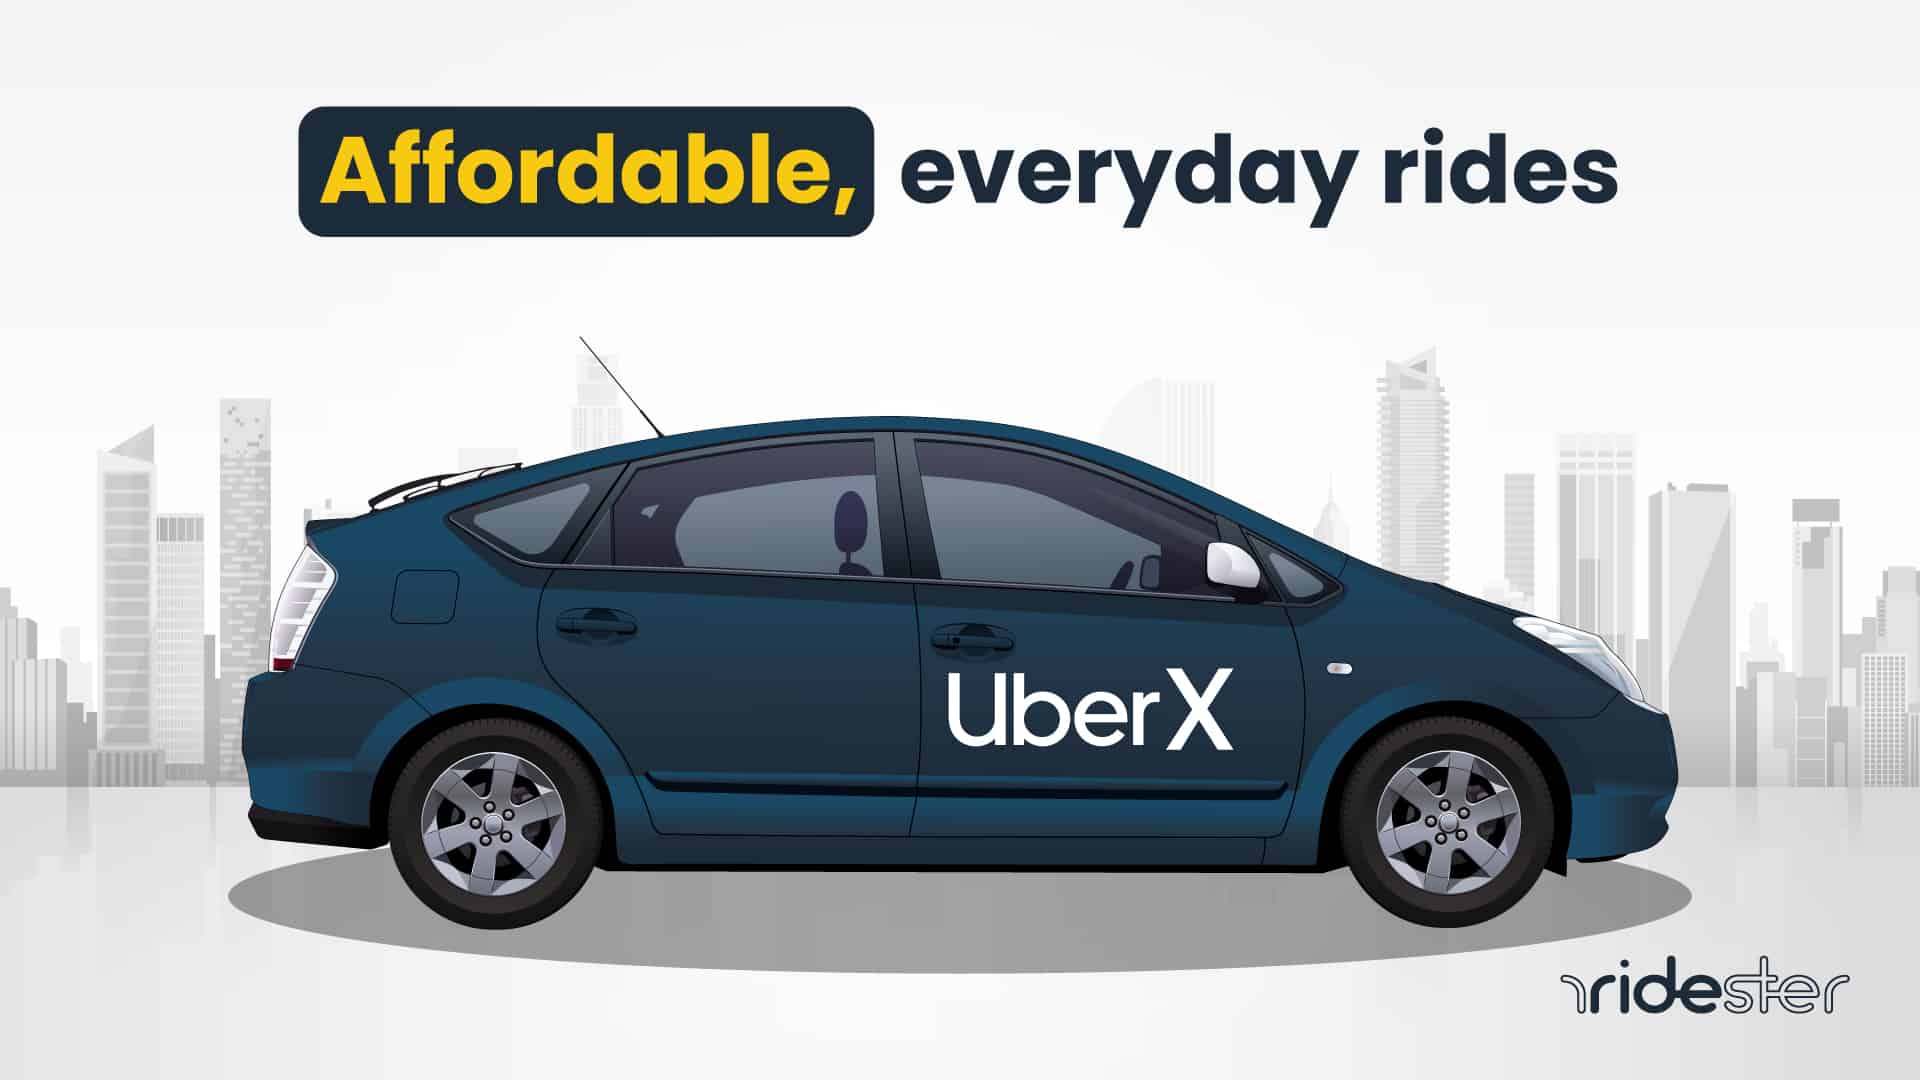 uber x meaning